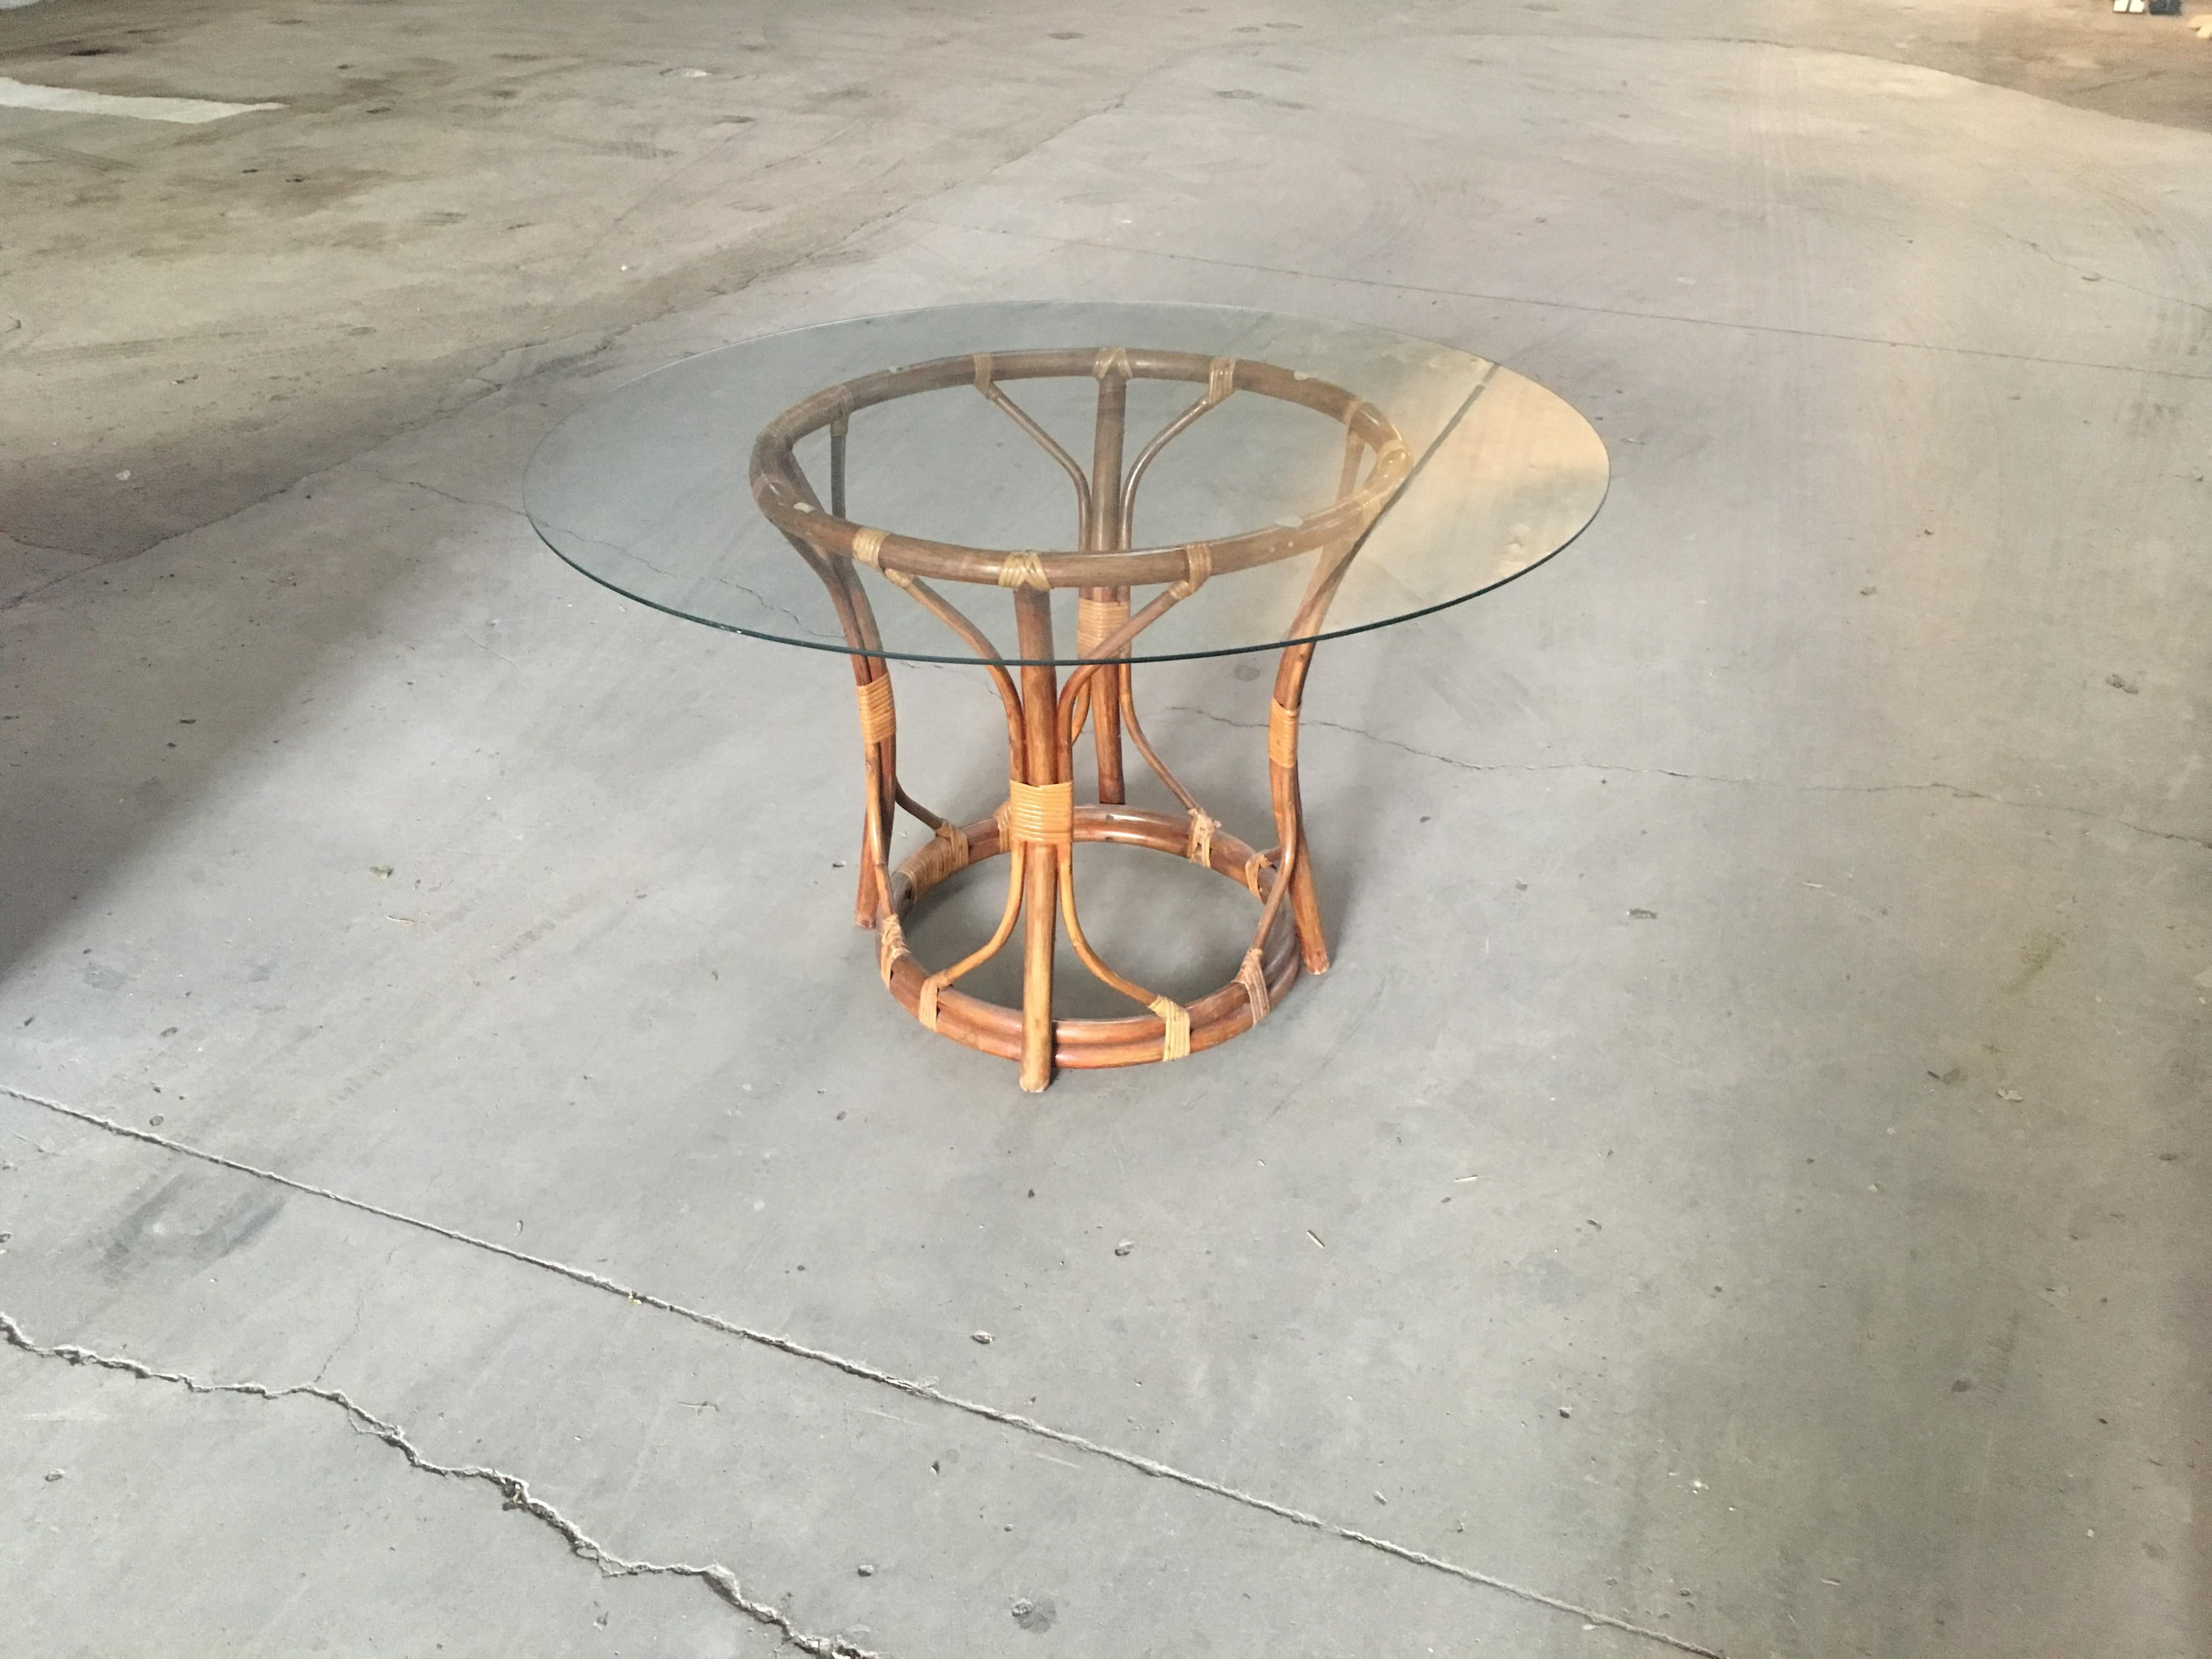 Late 20th Century Mid-Century Modern Italian Bamboo and Cane Round Table with Glass Top, 1970s For Sale